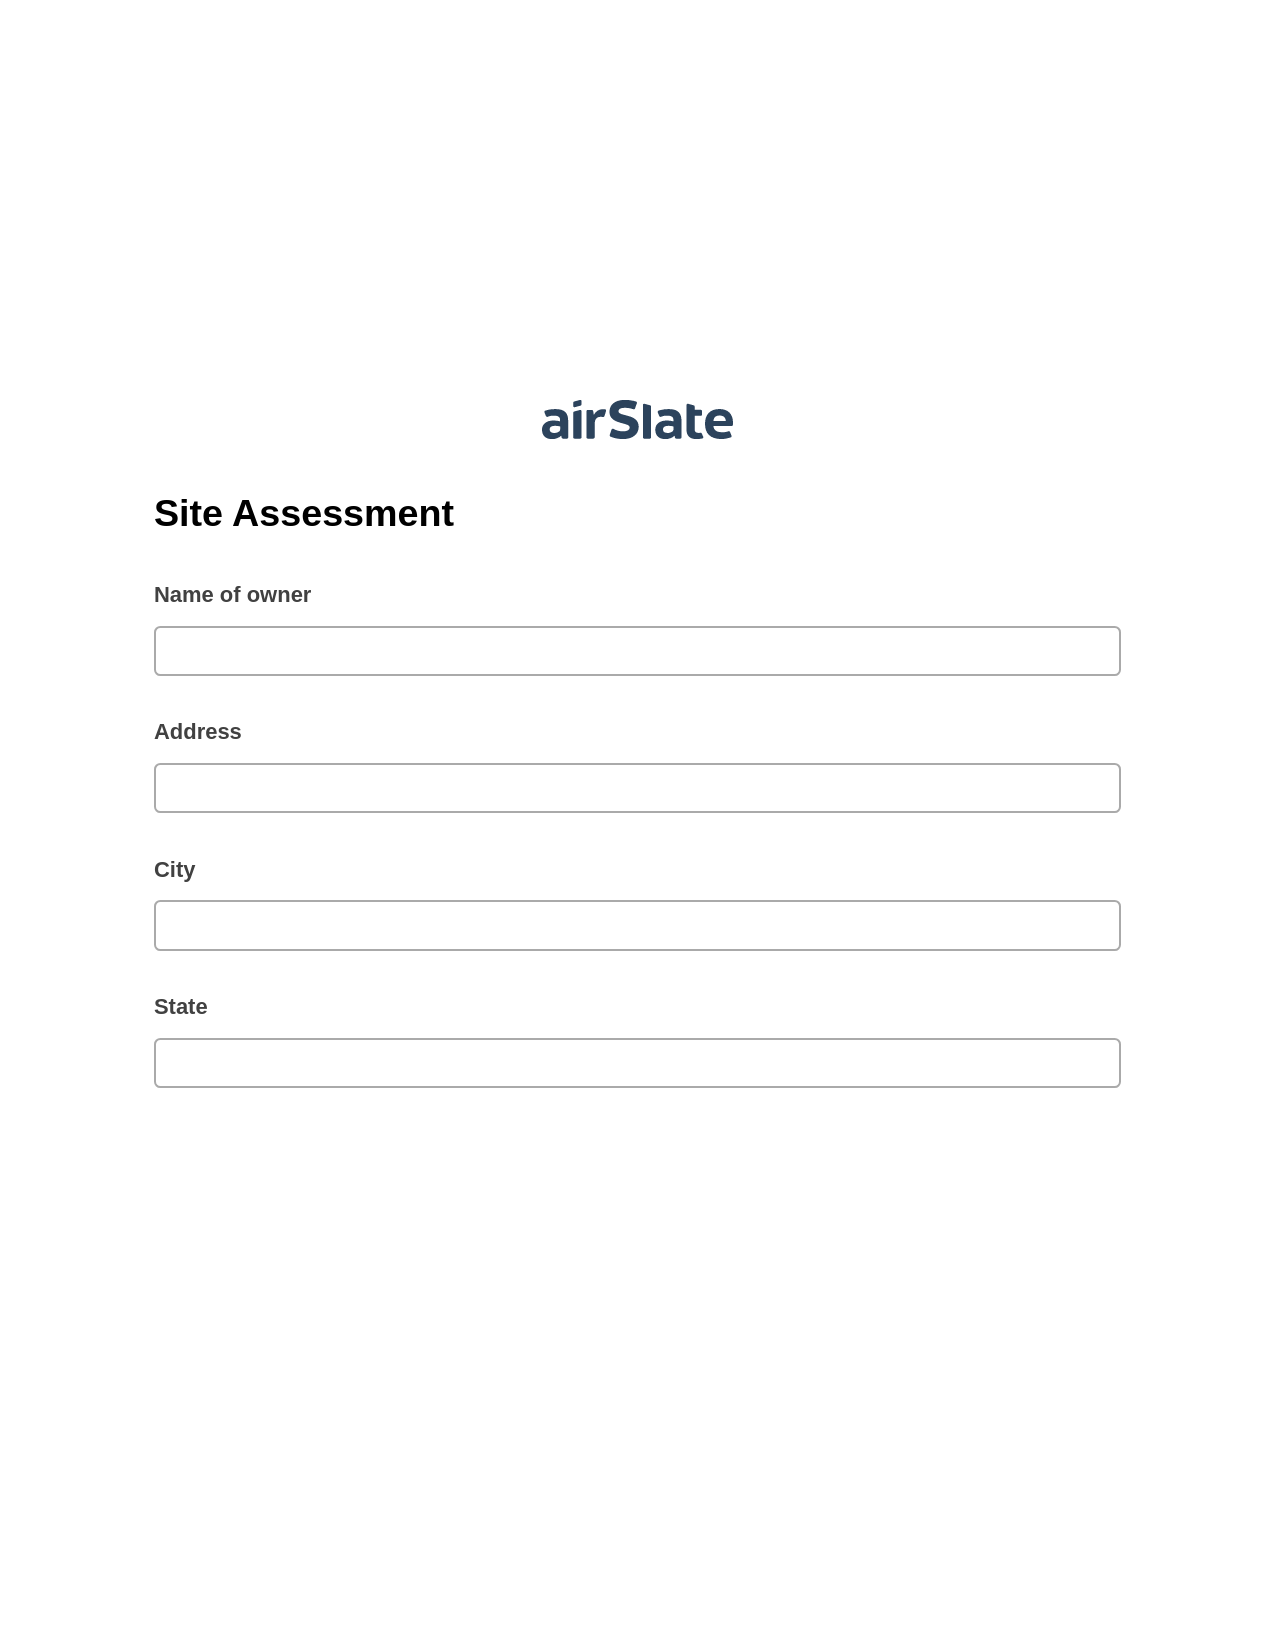 Site Assessment Pre-fill from Salesforce Records with SOQL Bot, Invoke Salesforce Process Bot, Export to Smartsheet